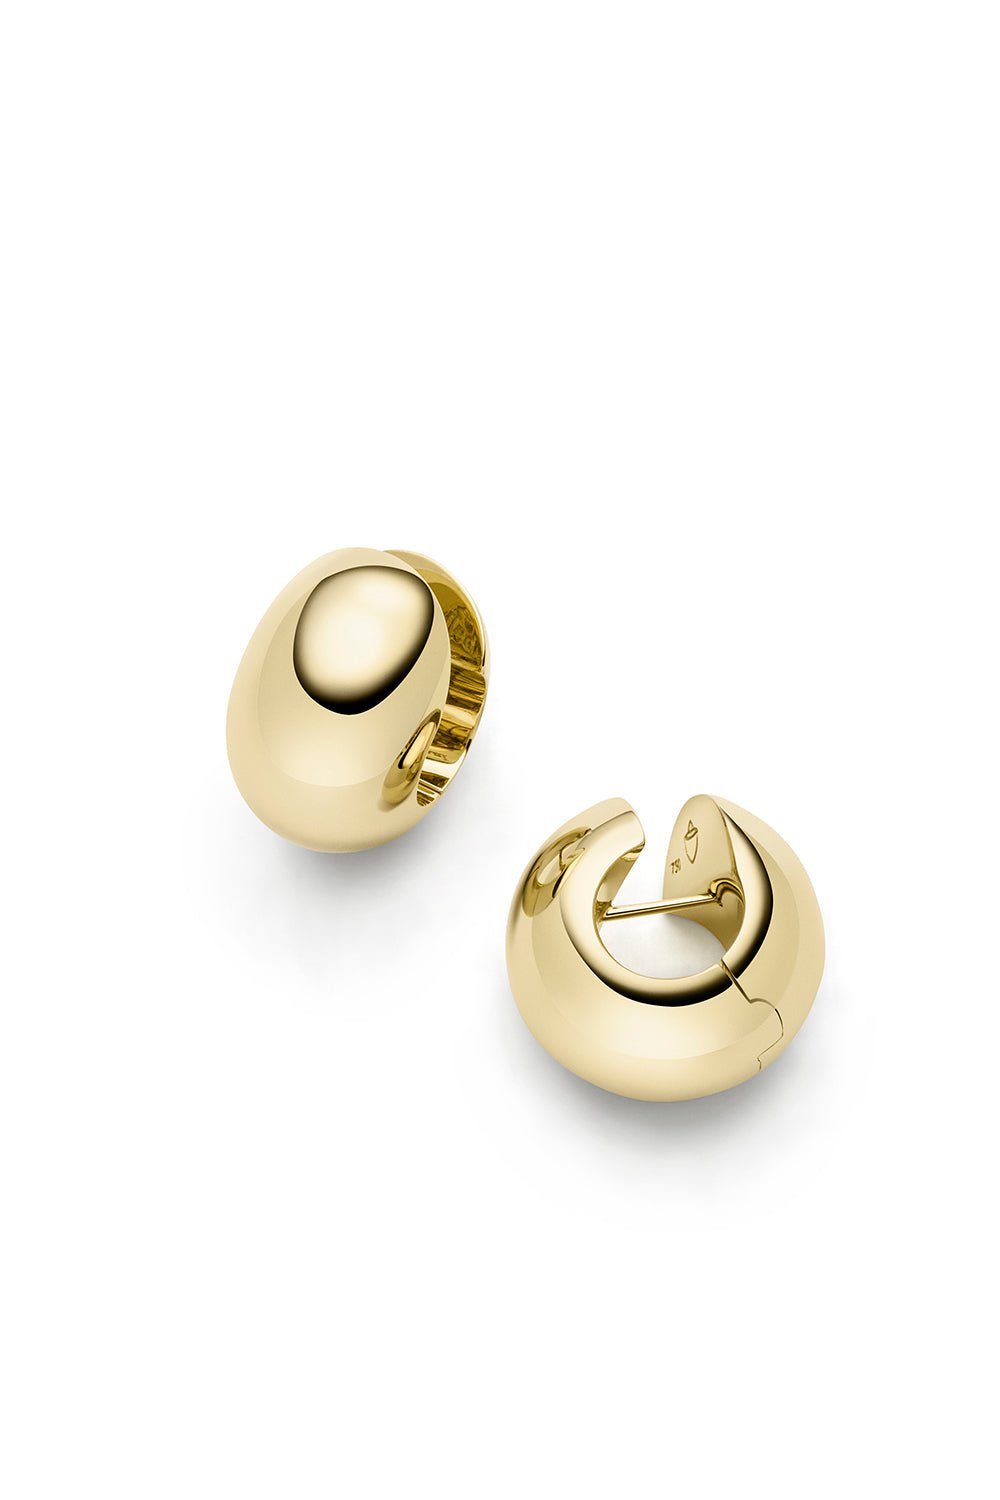 ISABELLE FA-Bulbe Creole Earrings-YELLOW GOLD